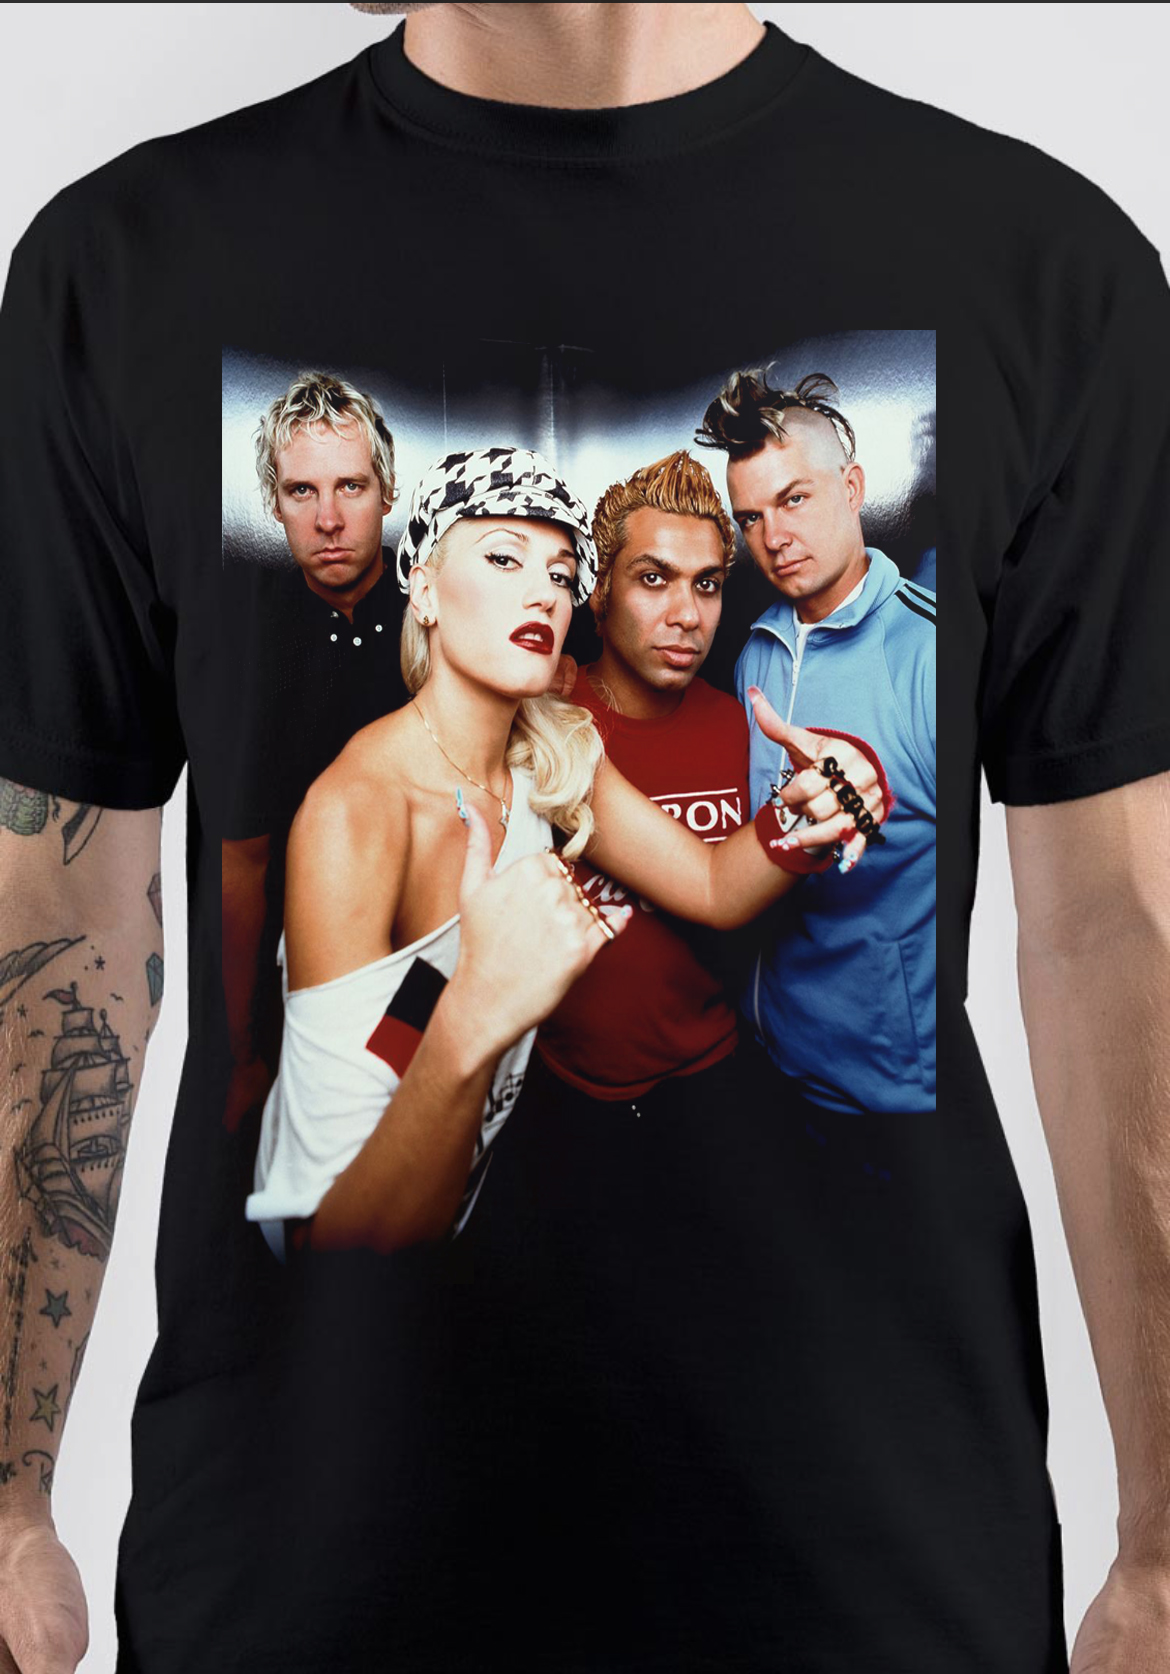 No Doubt T-Shirt And Merchandise